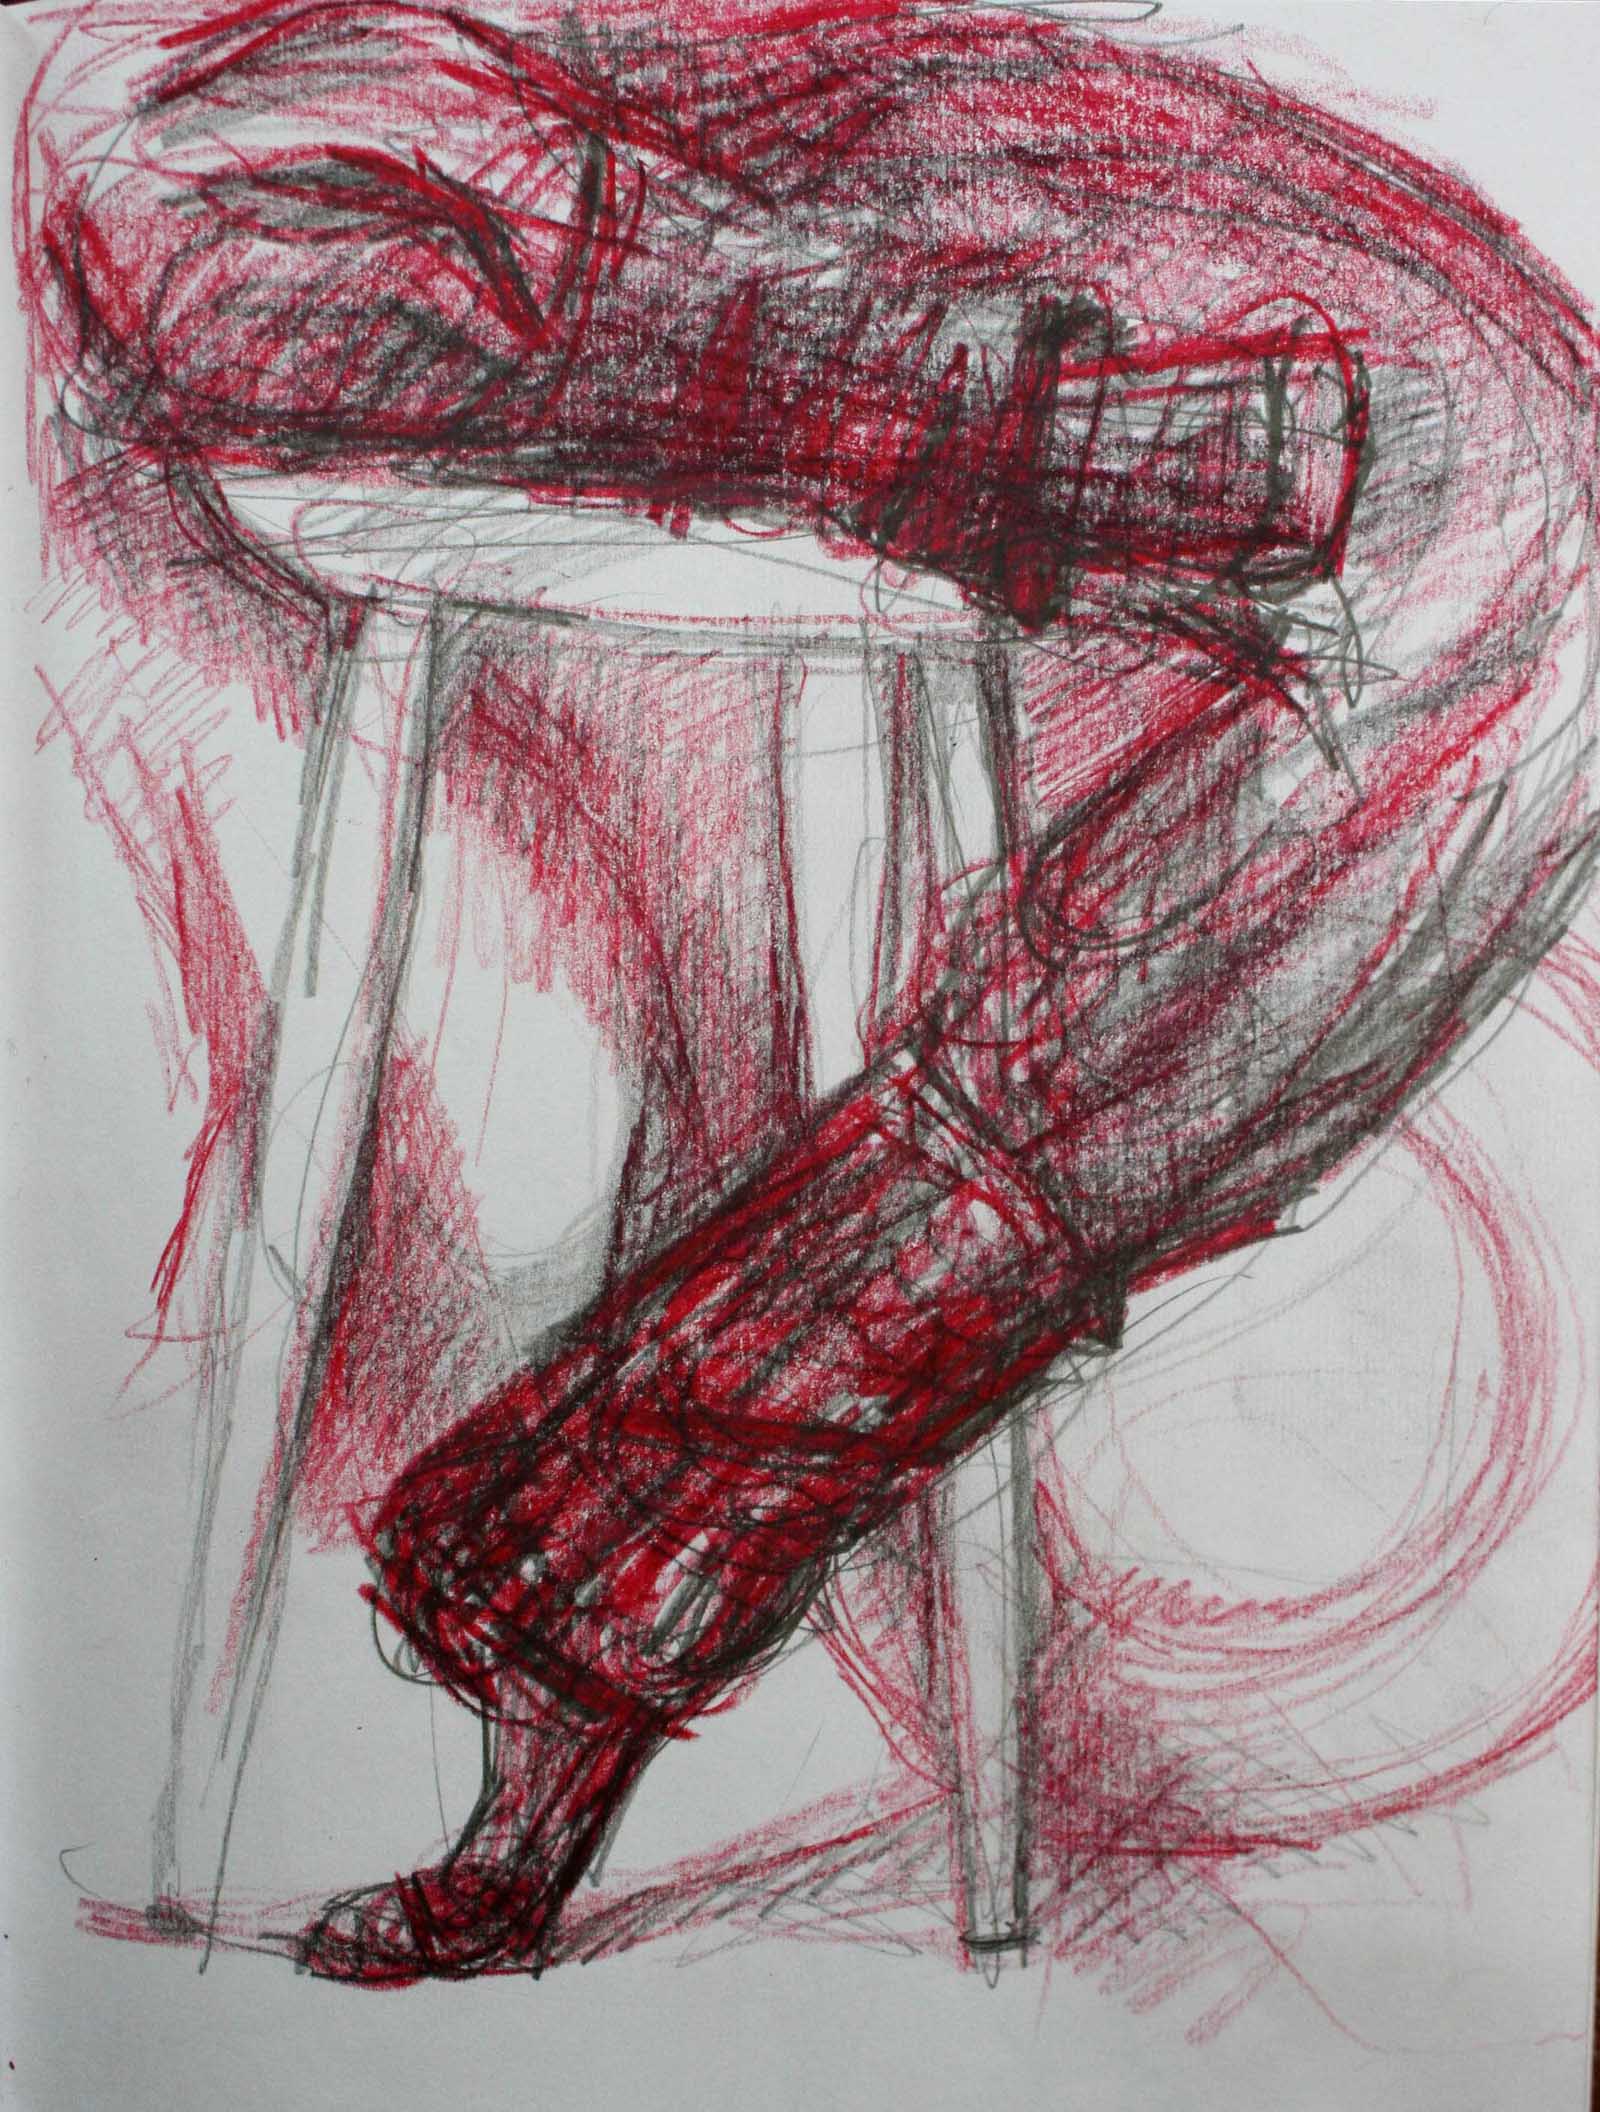   Red Legs II , 2014. Graphite and wax crayon on paper, 14 x 11" 